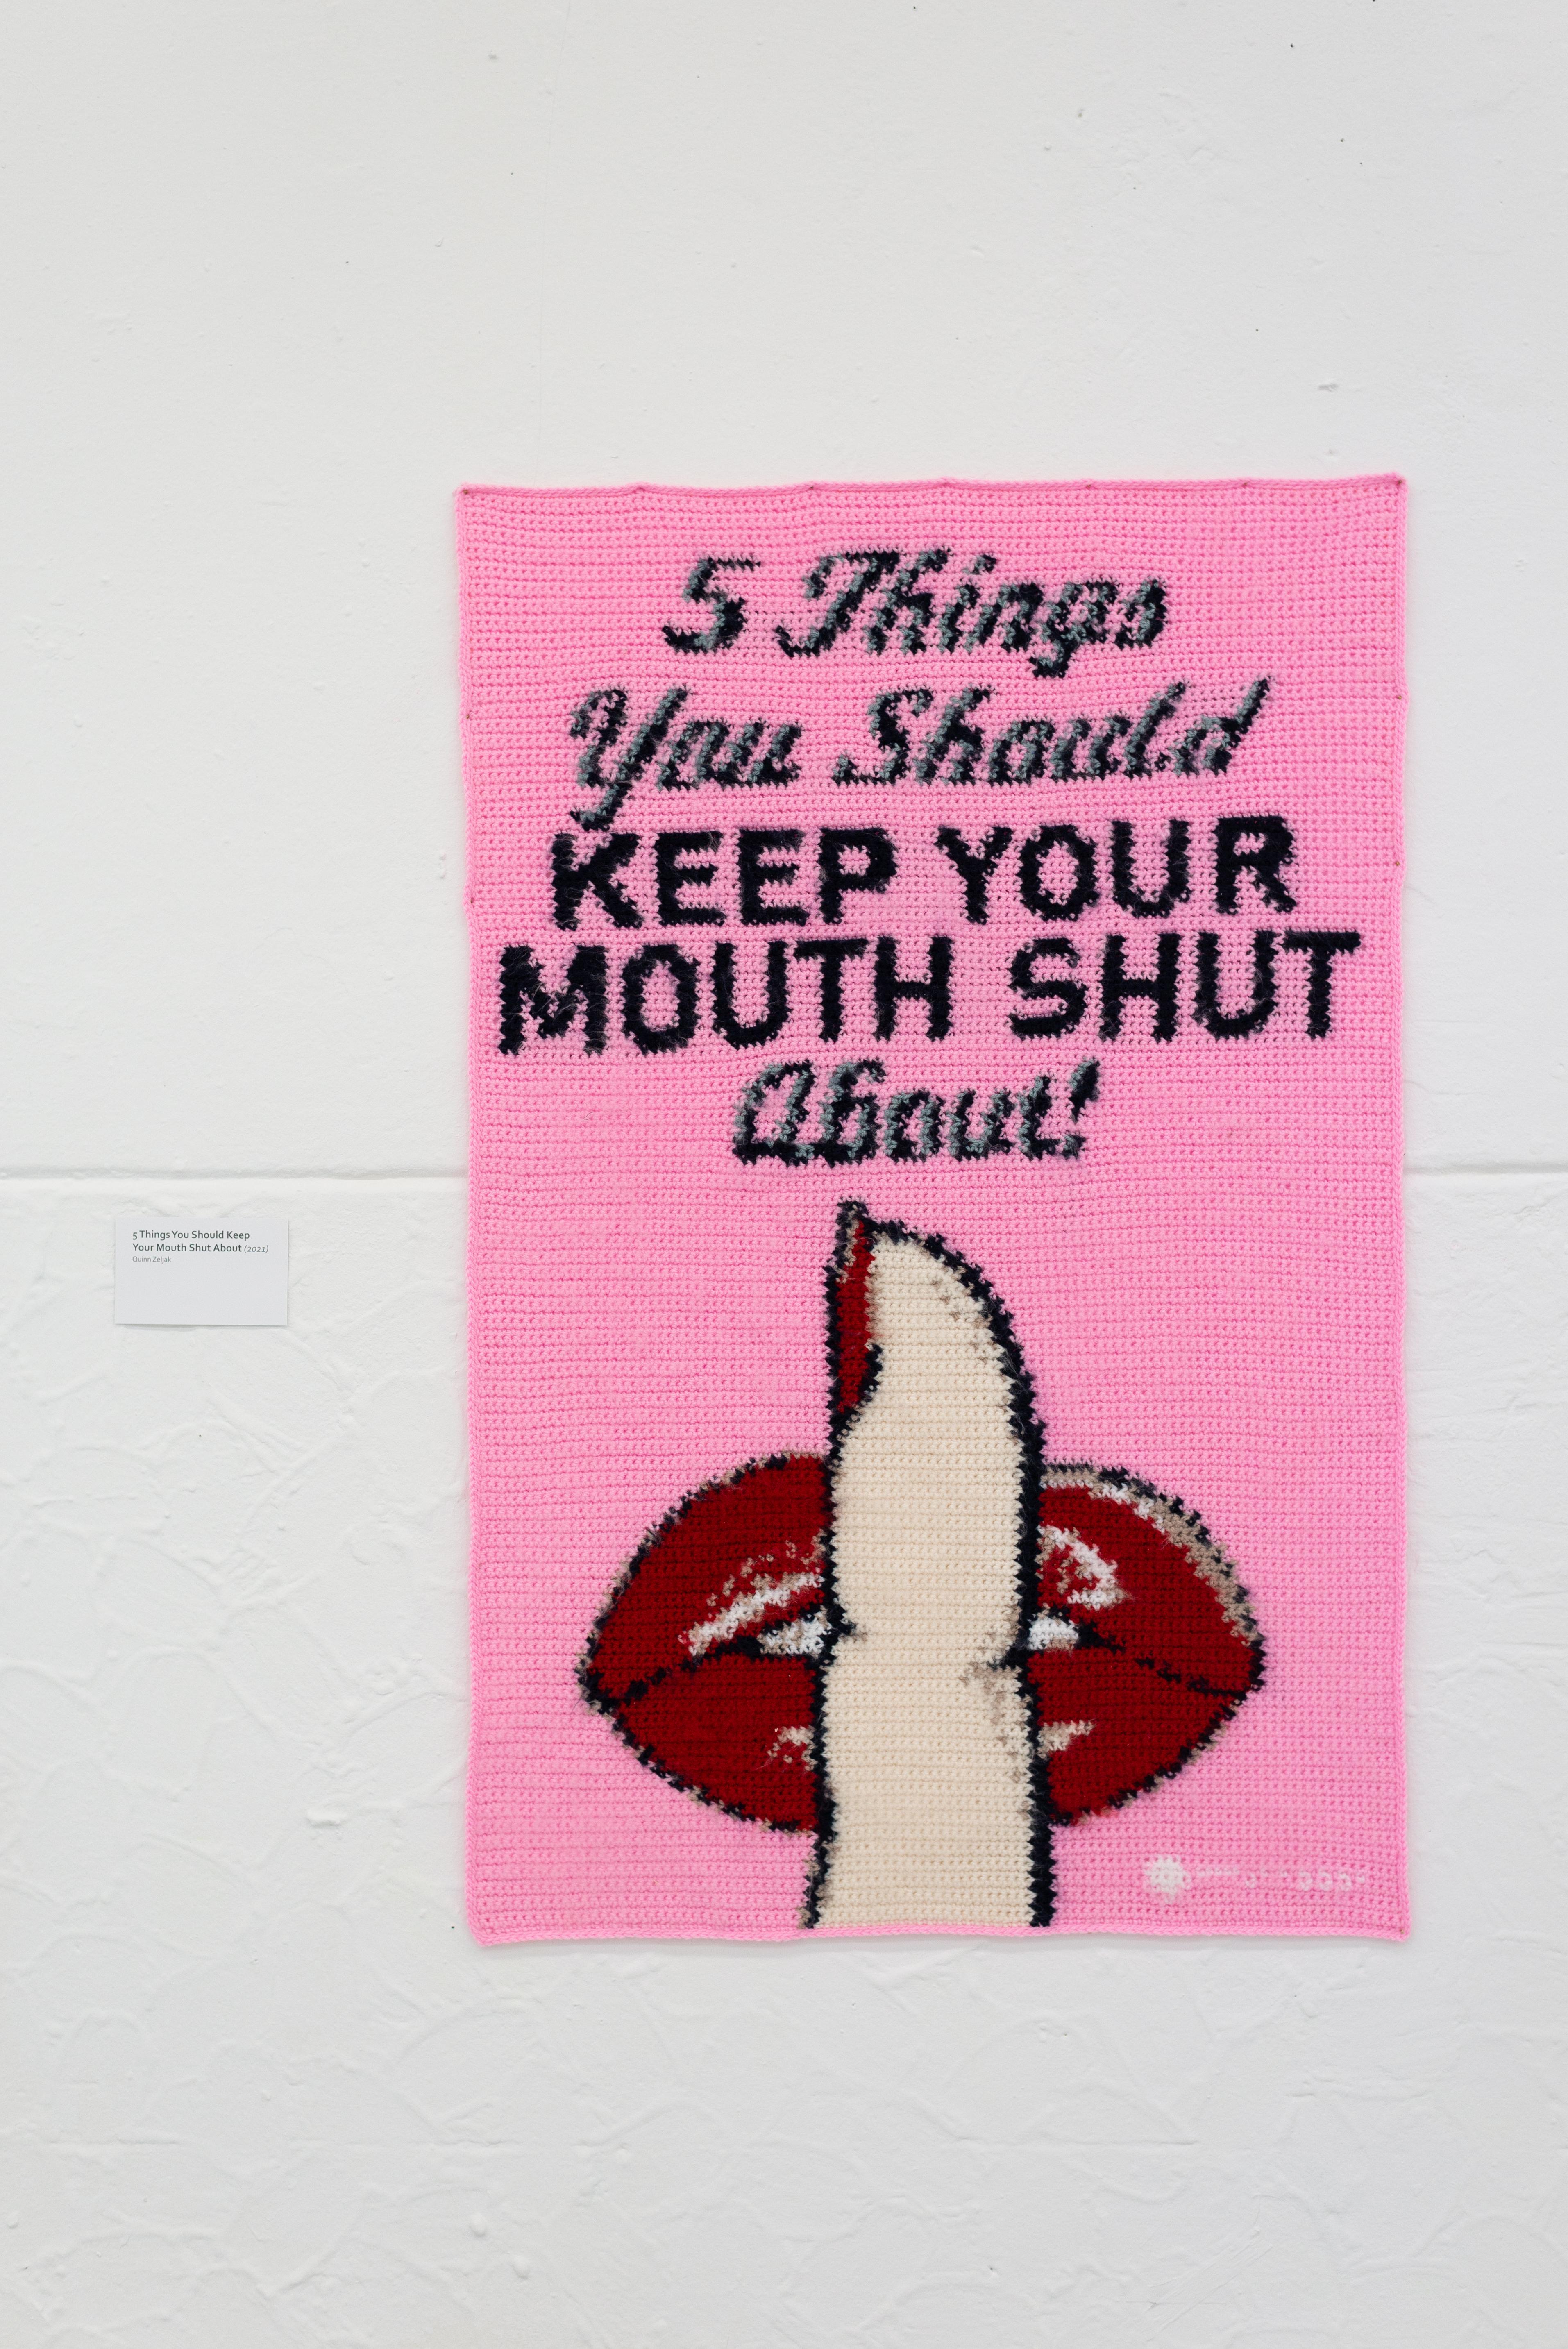 5 Things You Should Keep Your Mouth Shut About - Mixed Media Art by Quinn Zeljak